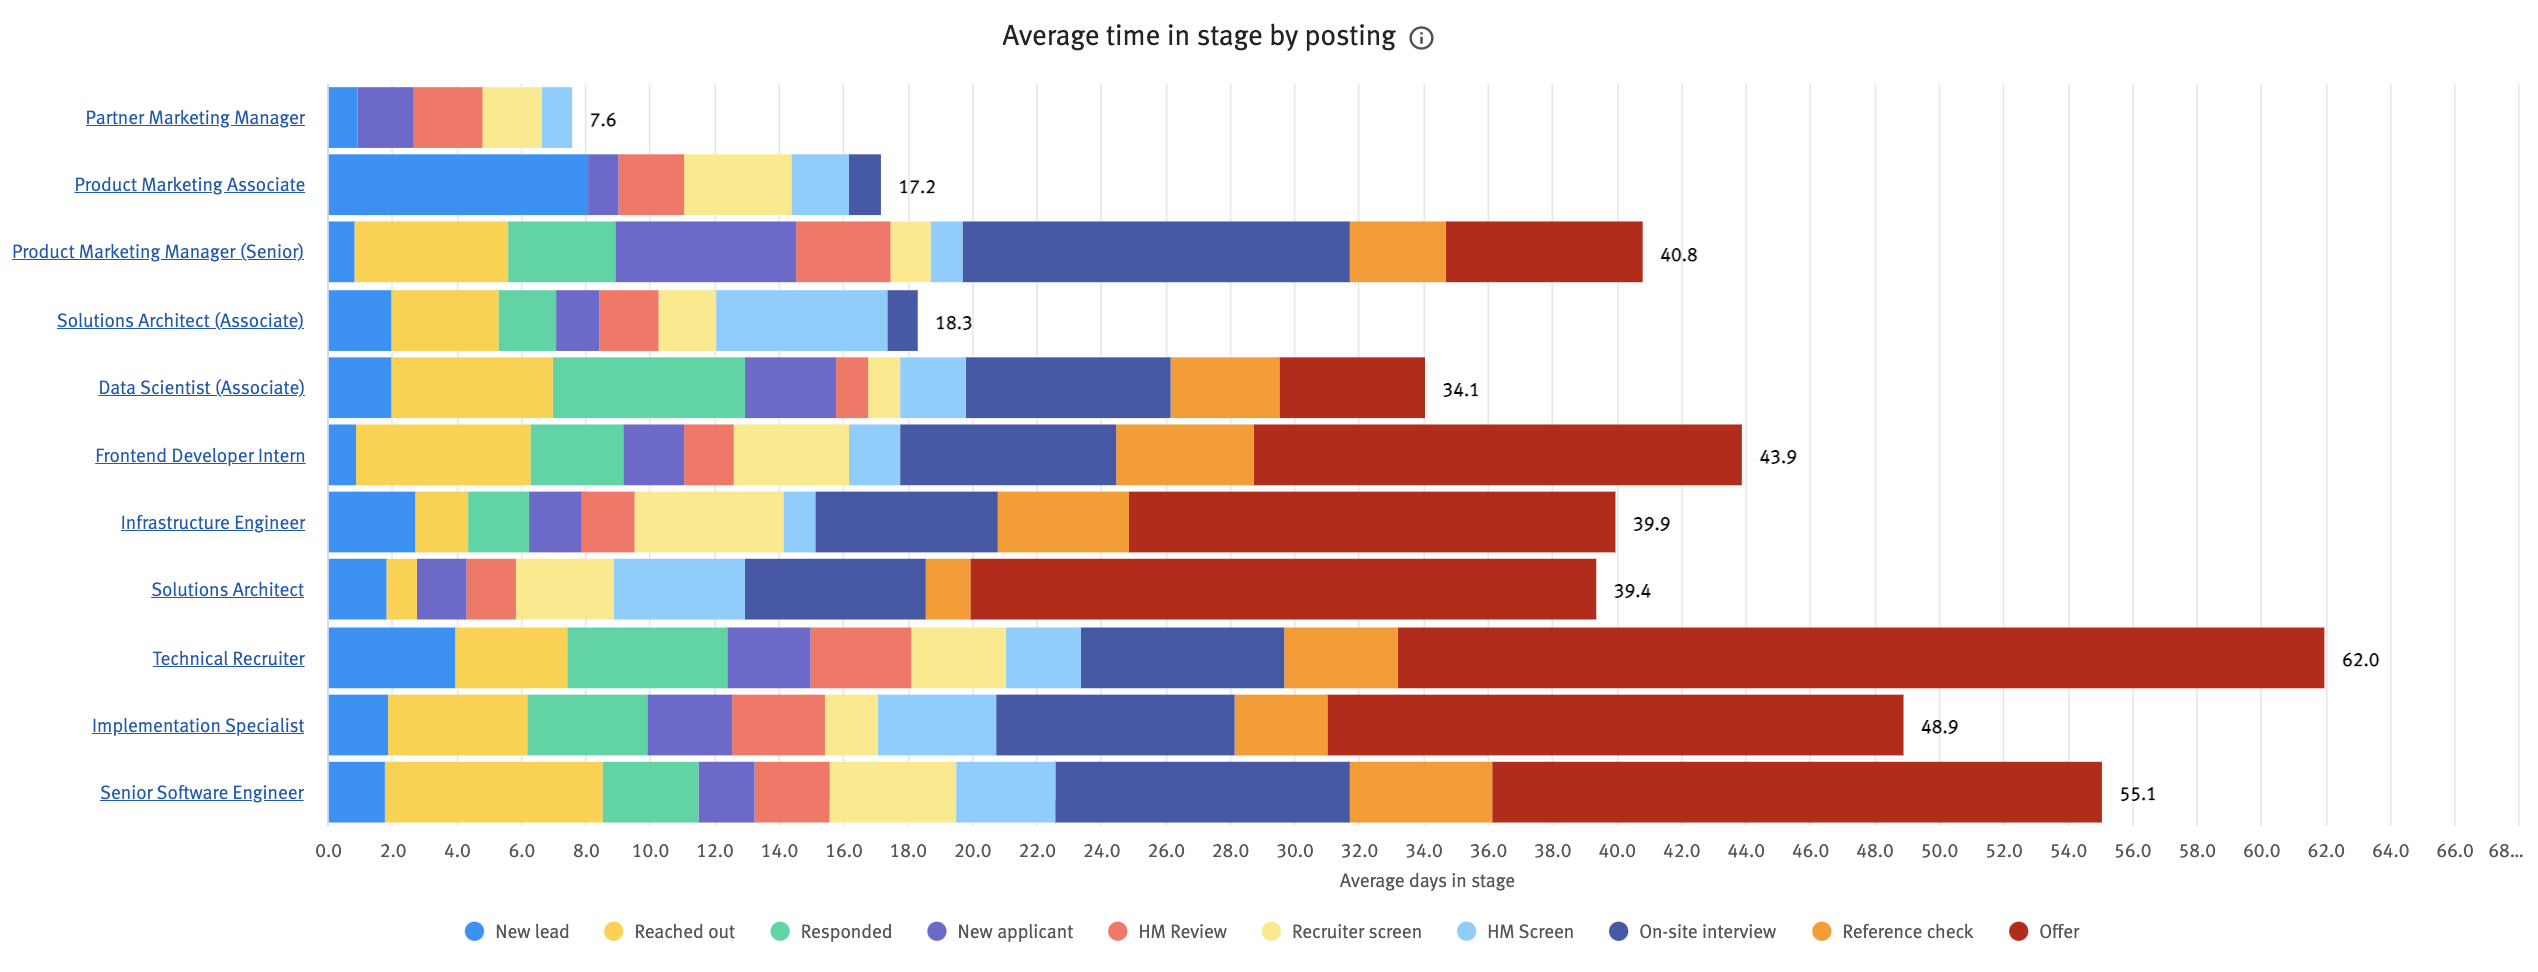 Average time in stage by posting chart